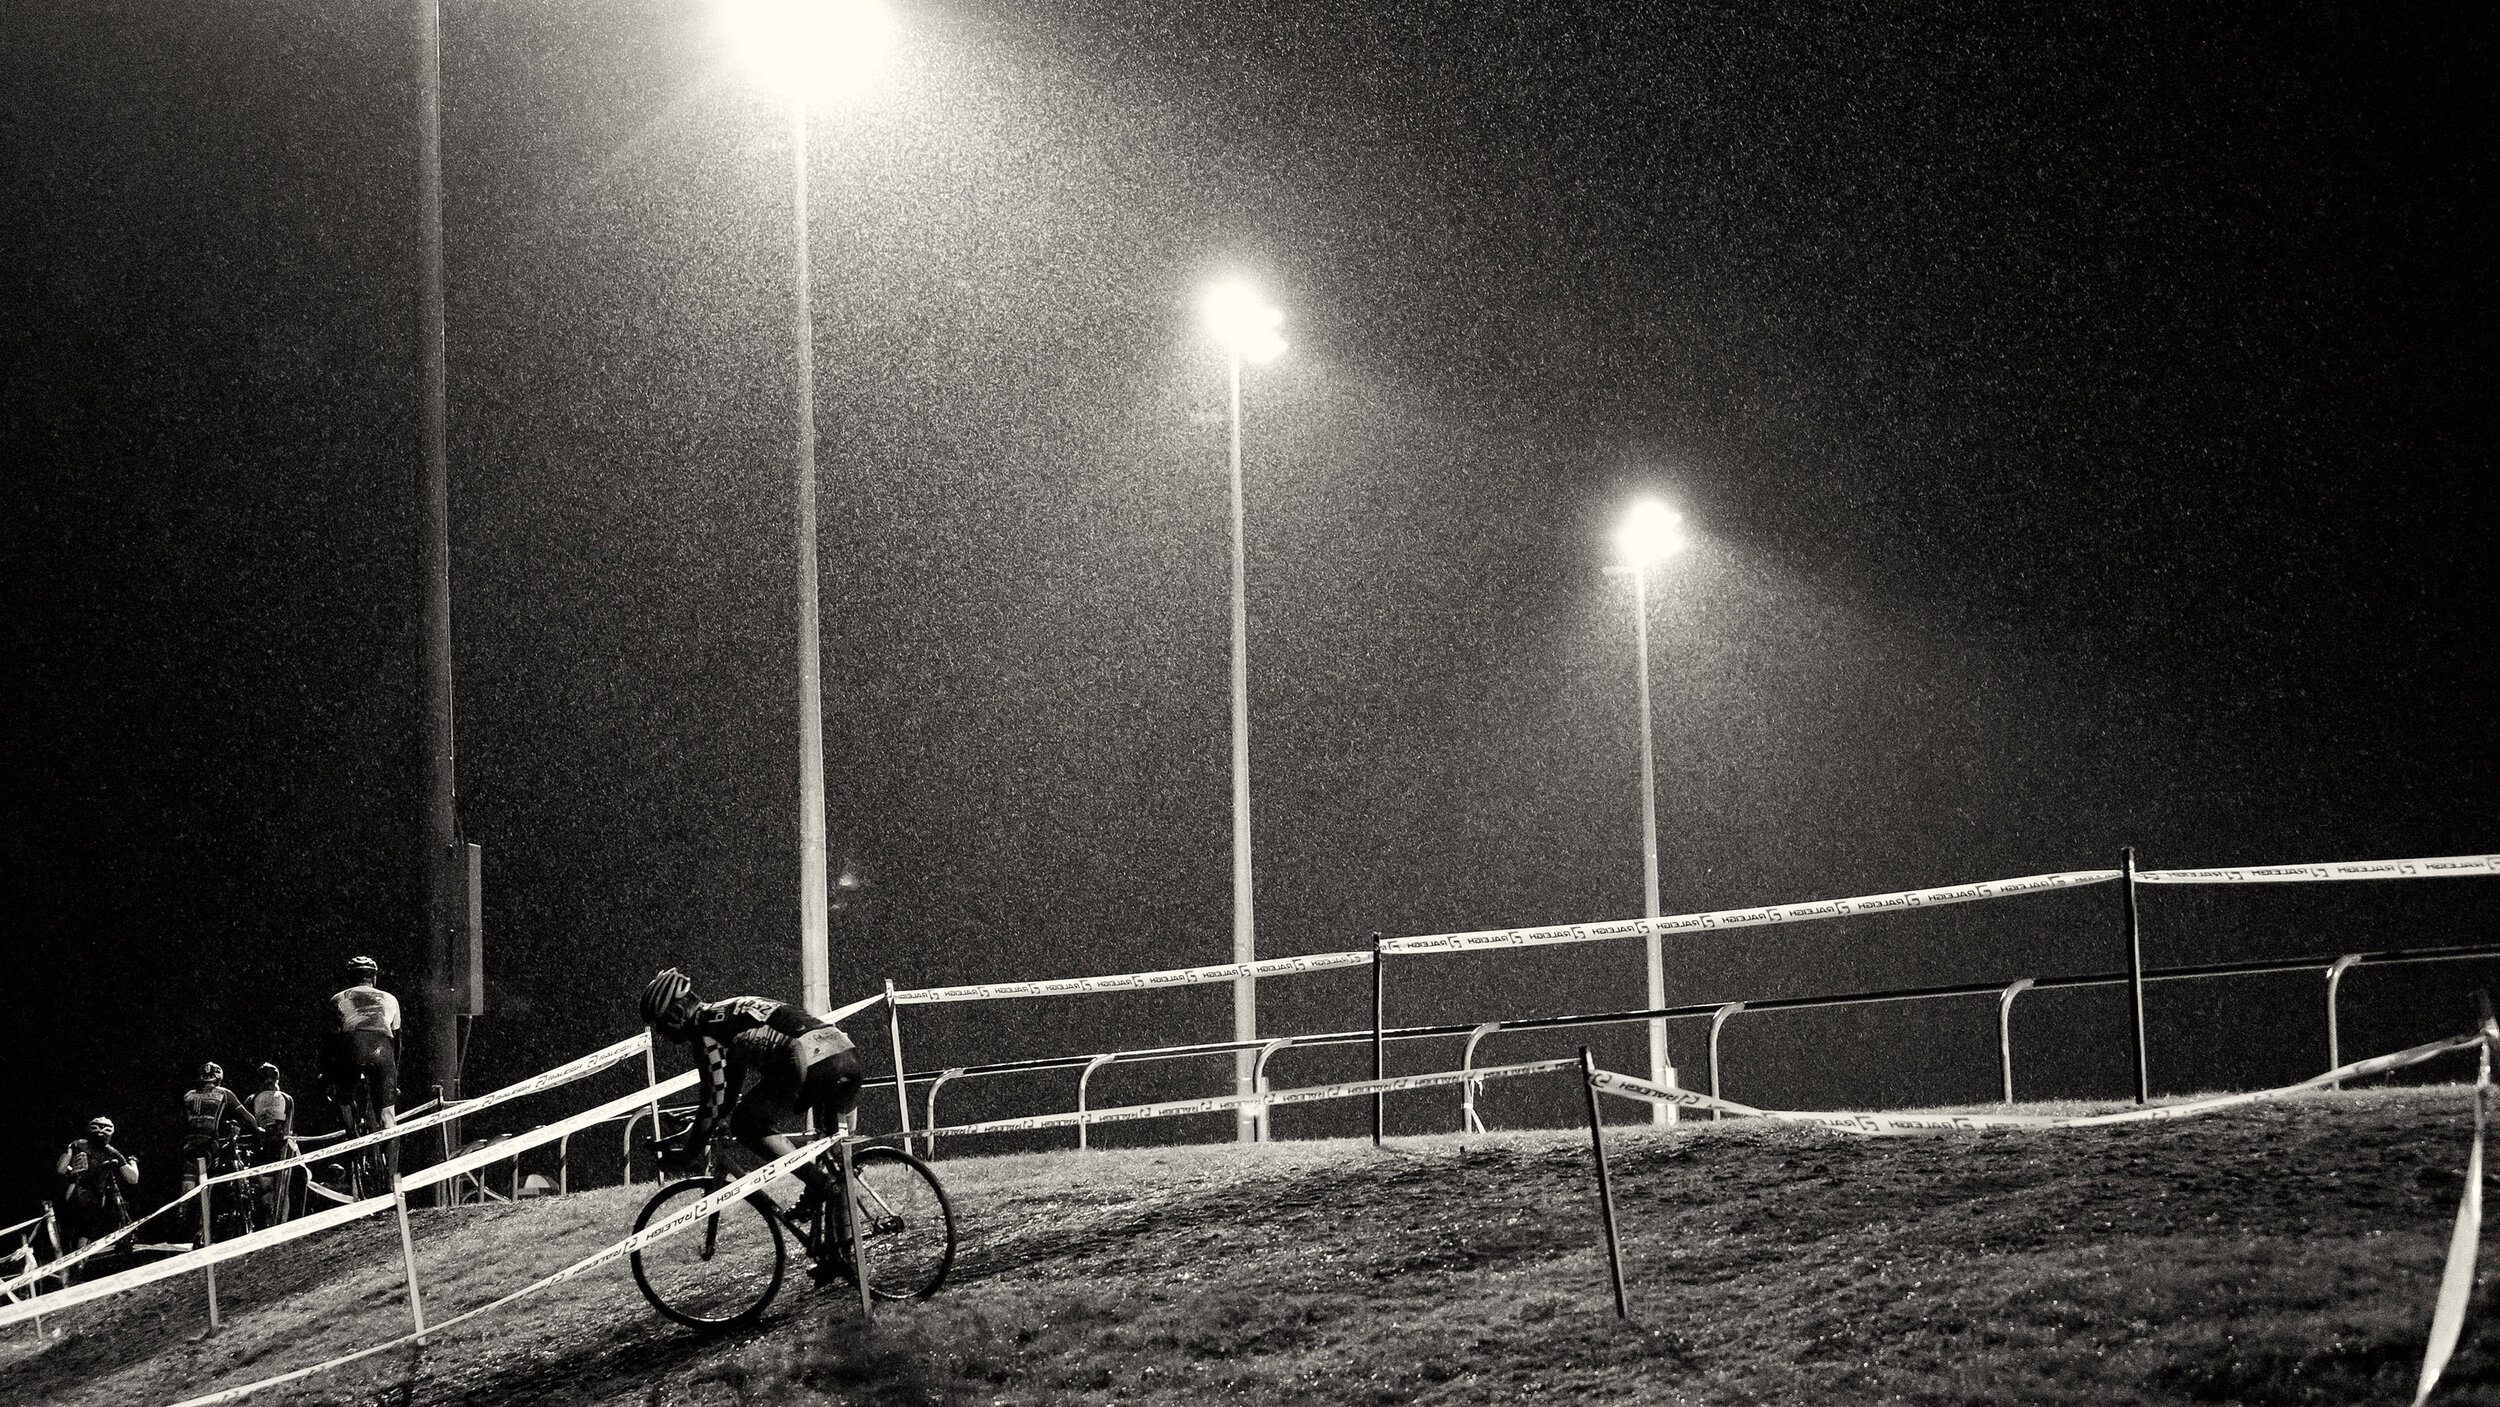  Competition: Cyclocross racers during a race on a rainy night at Marmoor Park, Redmond, Washington 